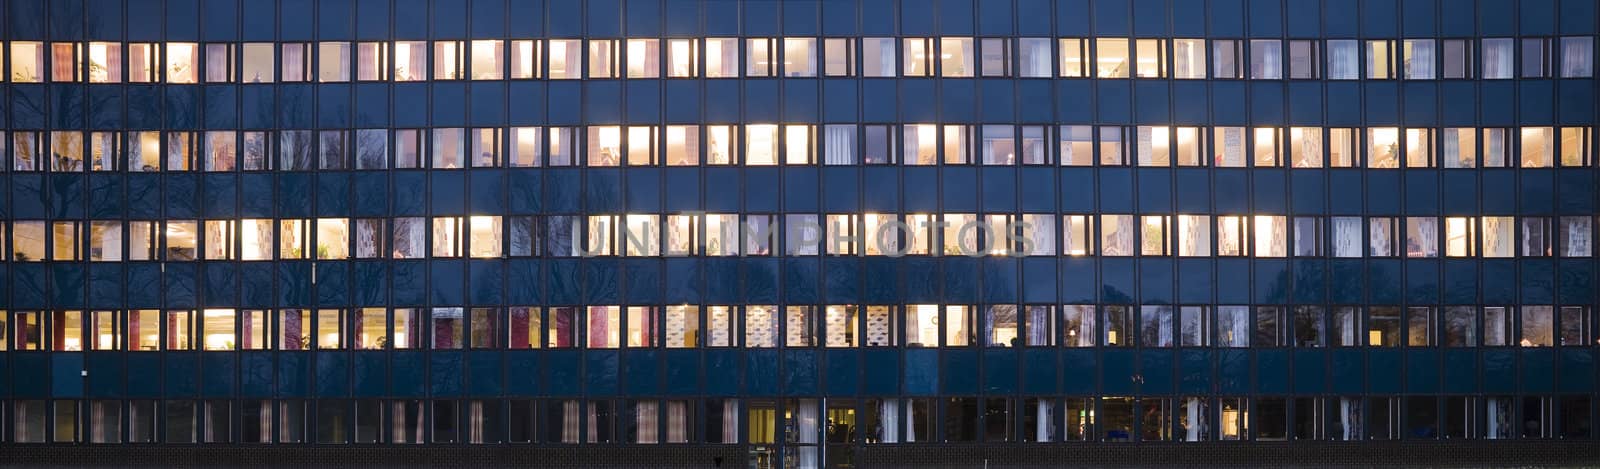 Windows glowing in the night on an office building